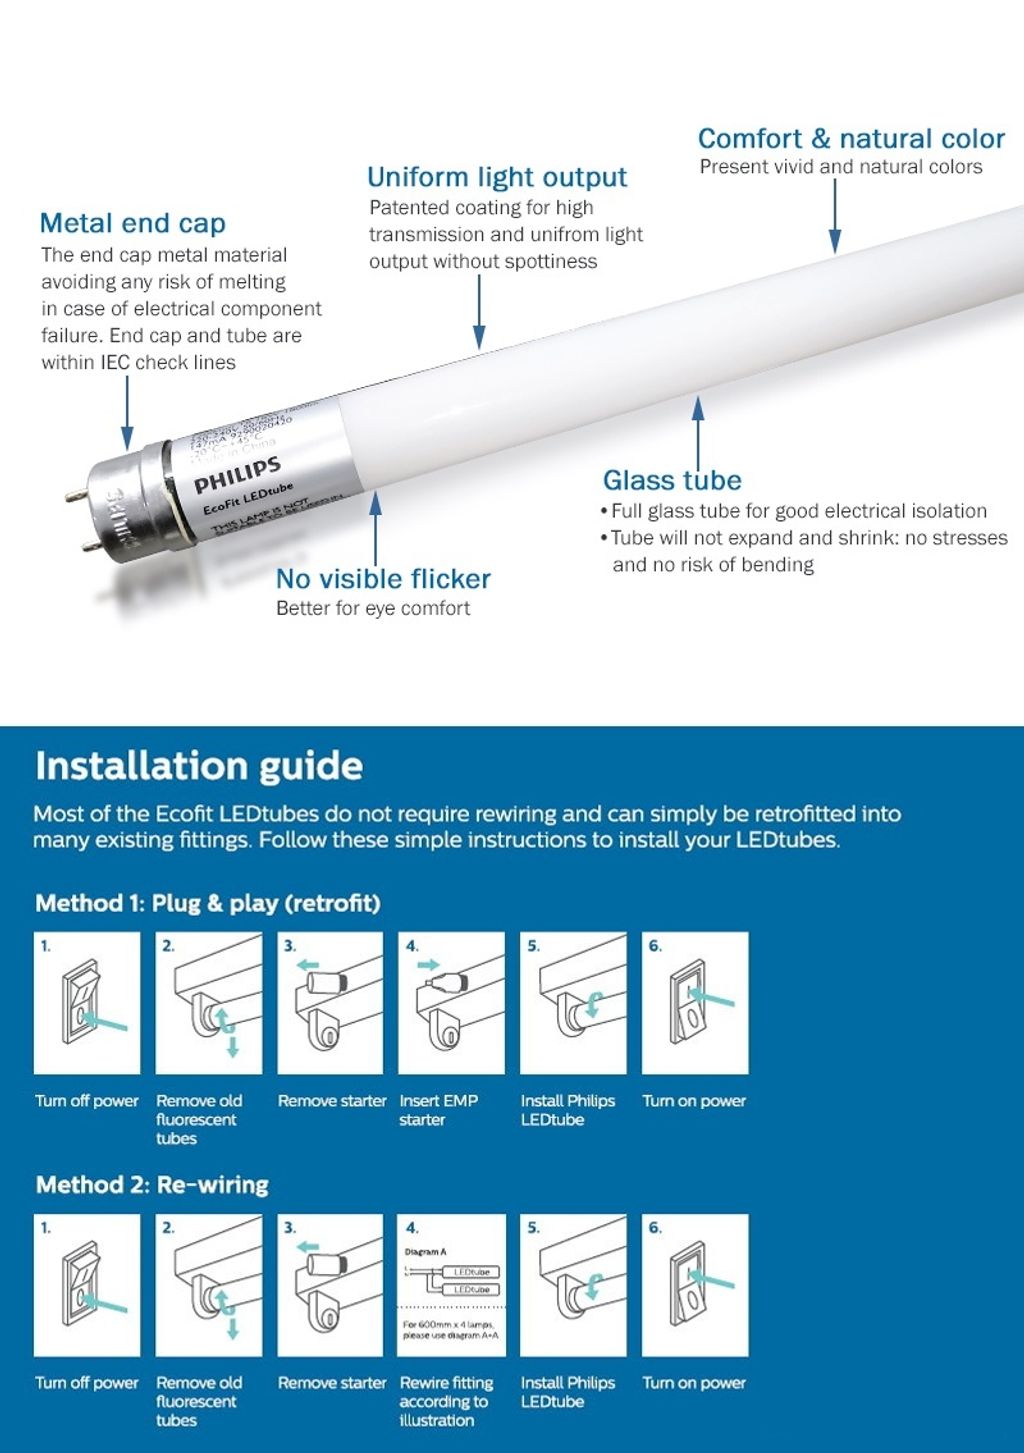 PHILIPS INSTALLATION GUIDE